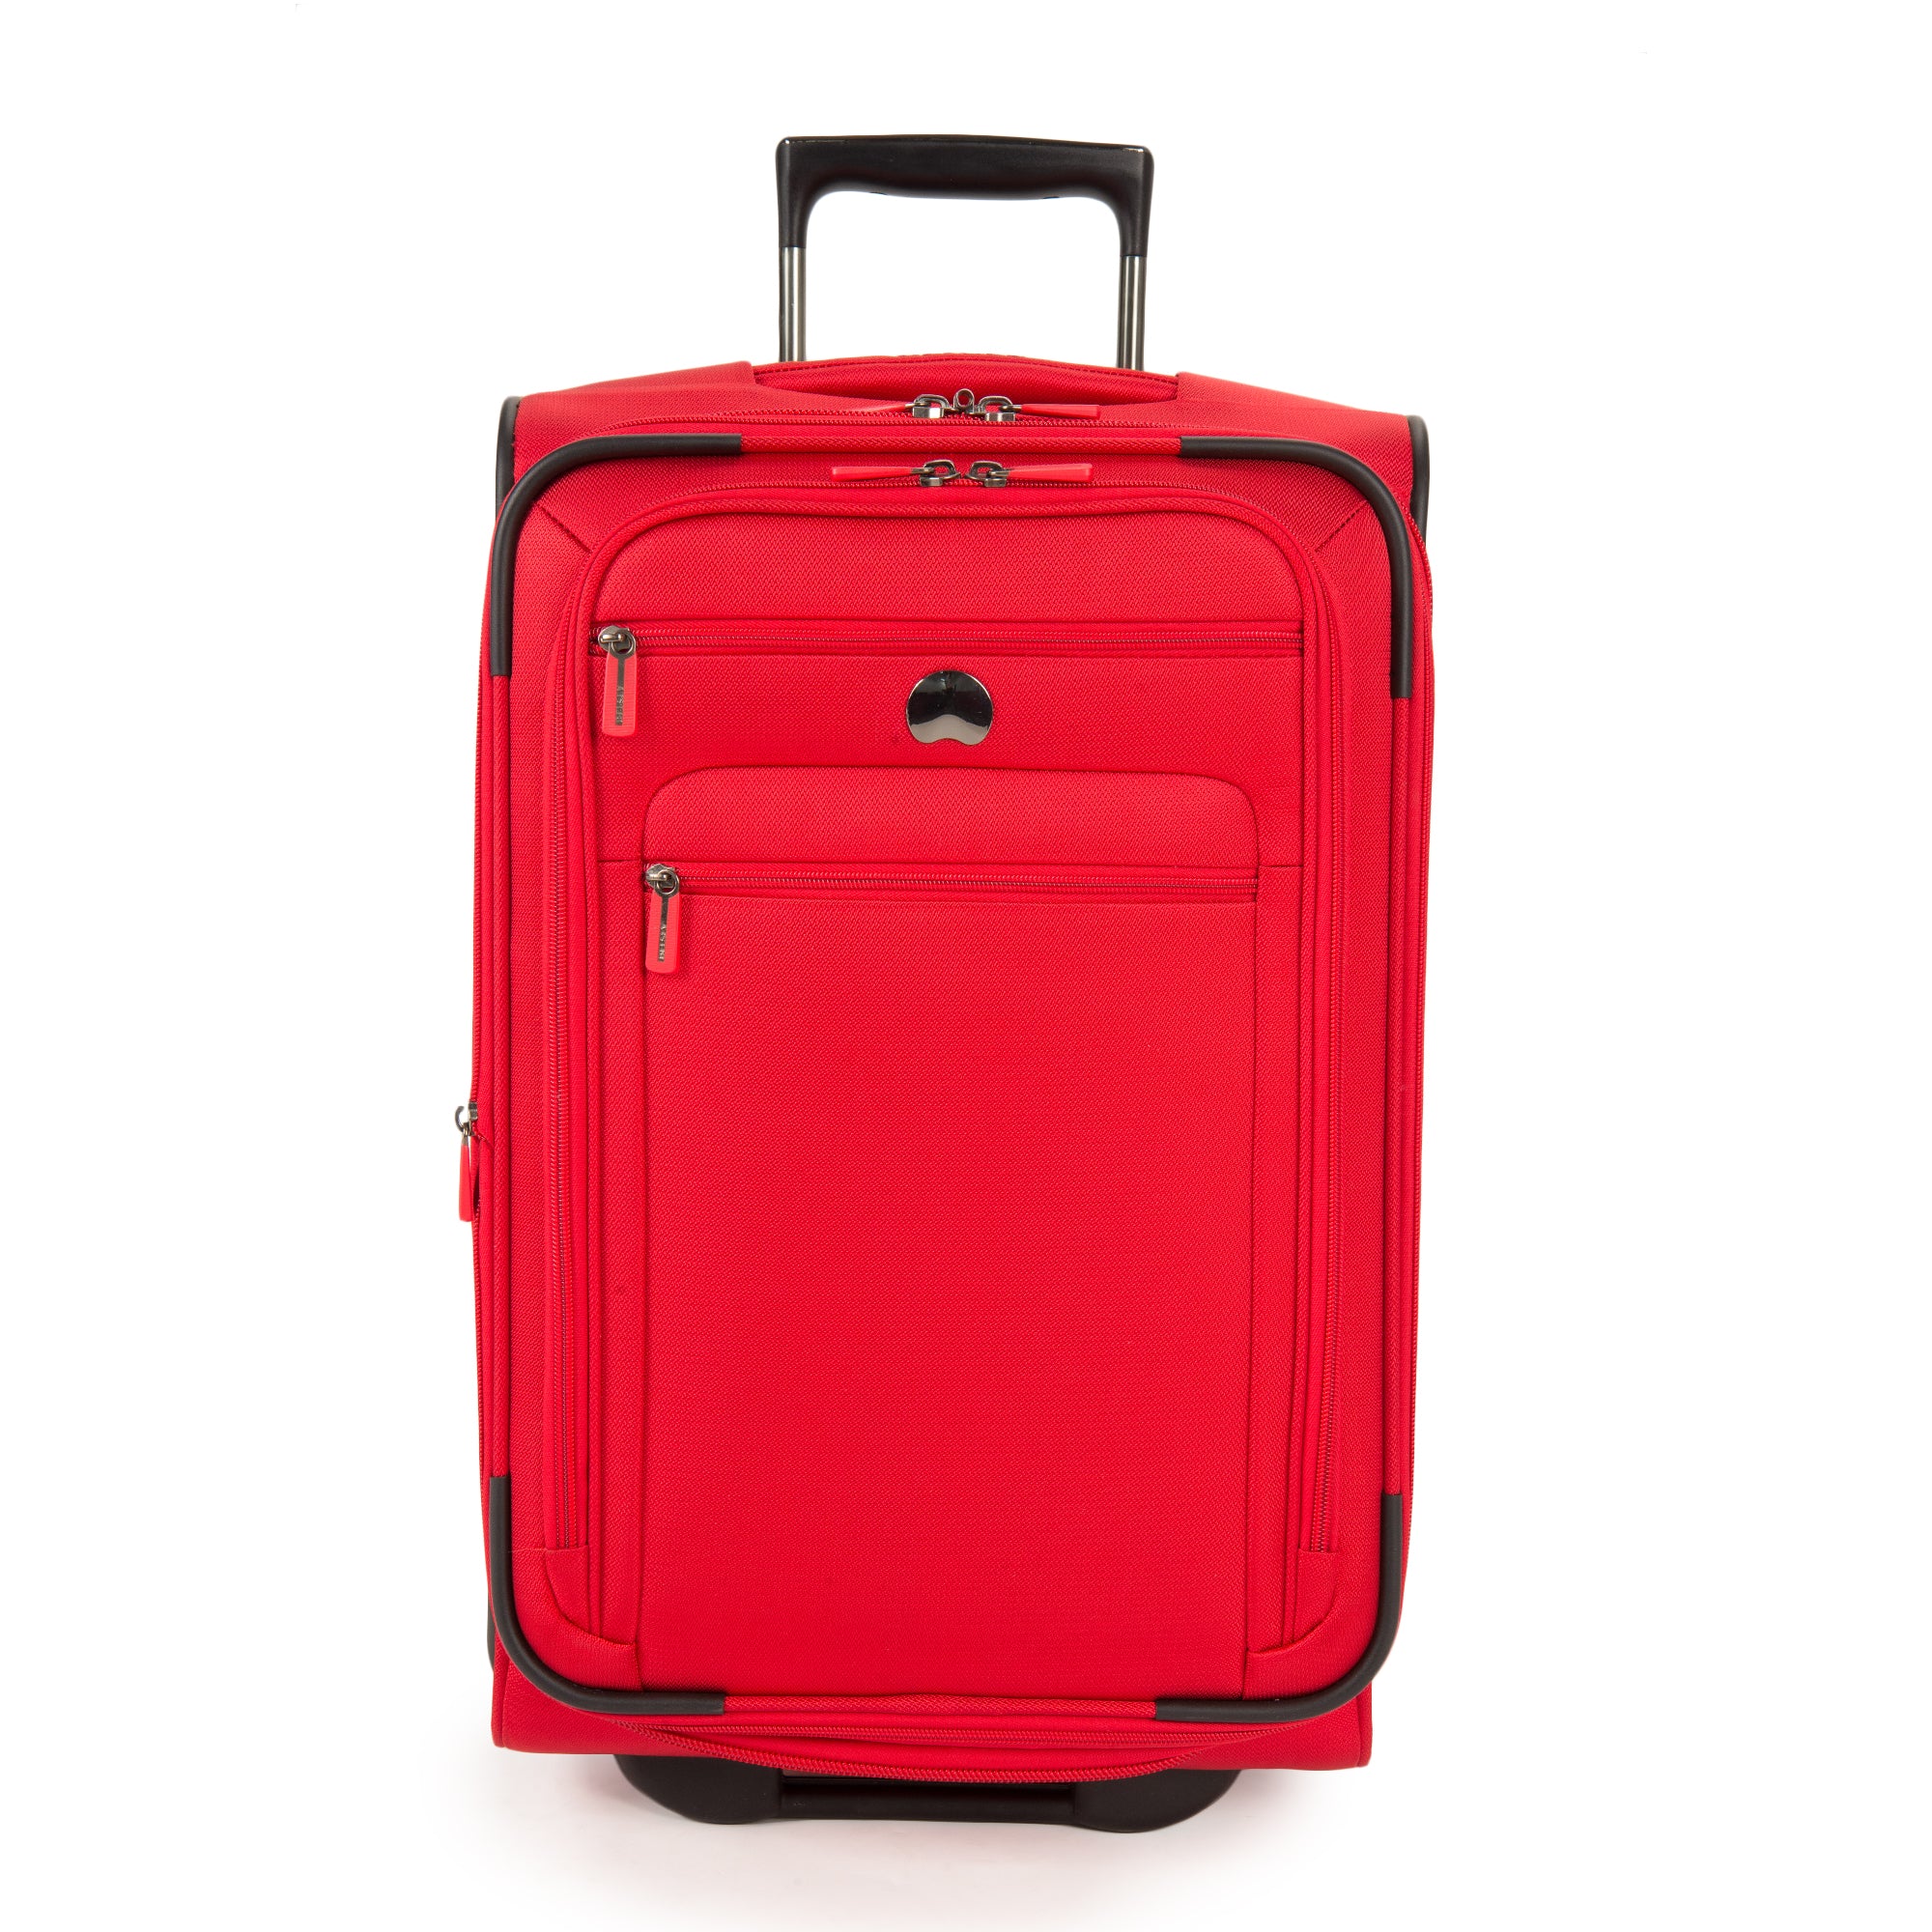 DELSEY Paris Helium Sky 2.0 21 2-Wheel Carry-On Luggage – Luggage Online